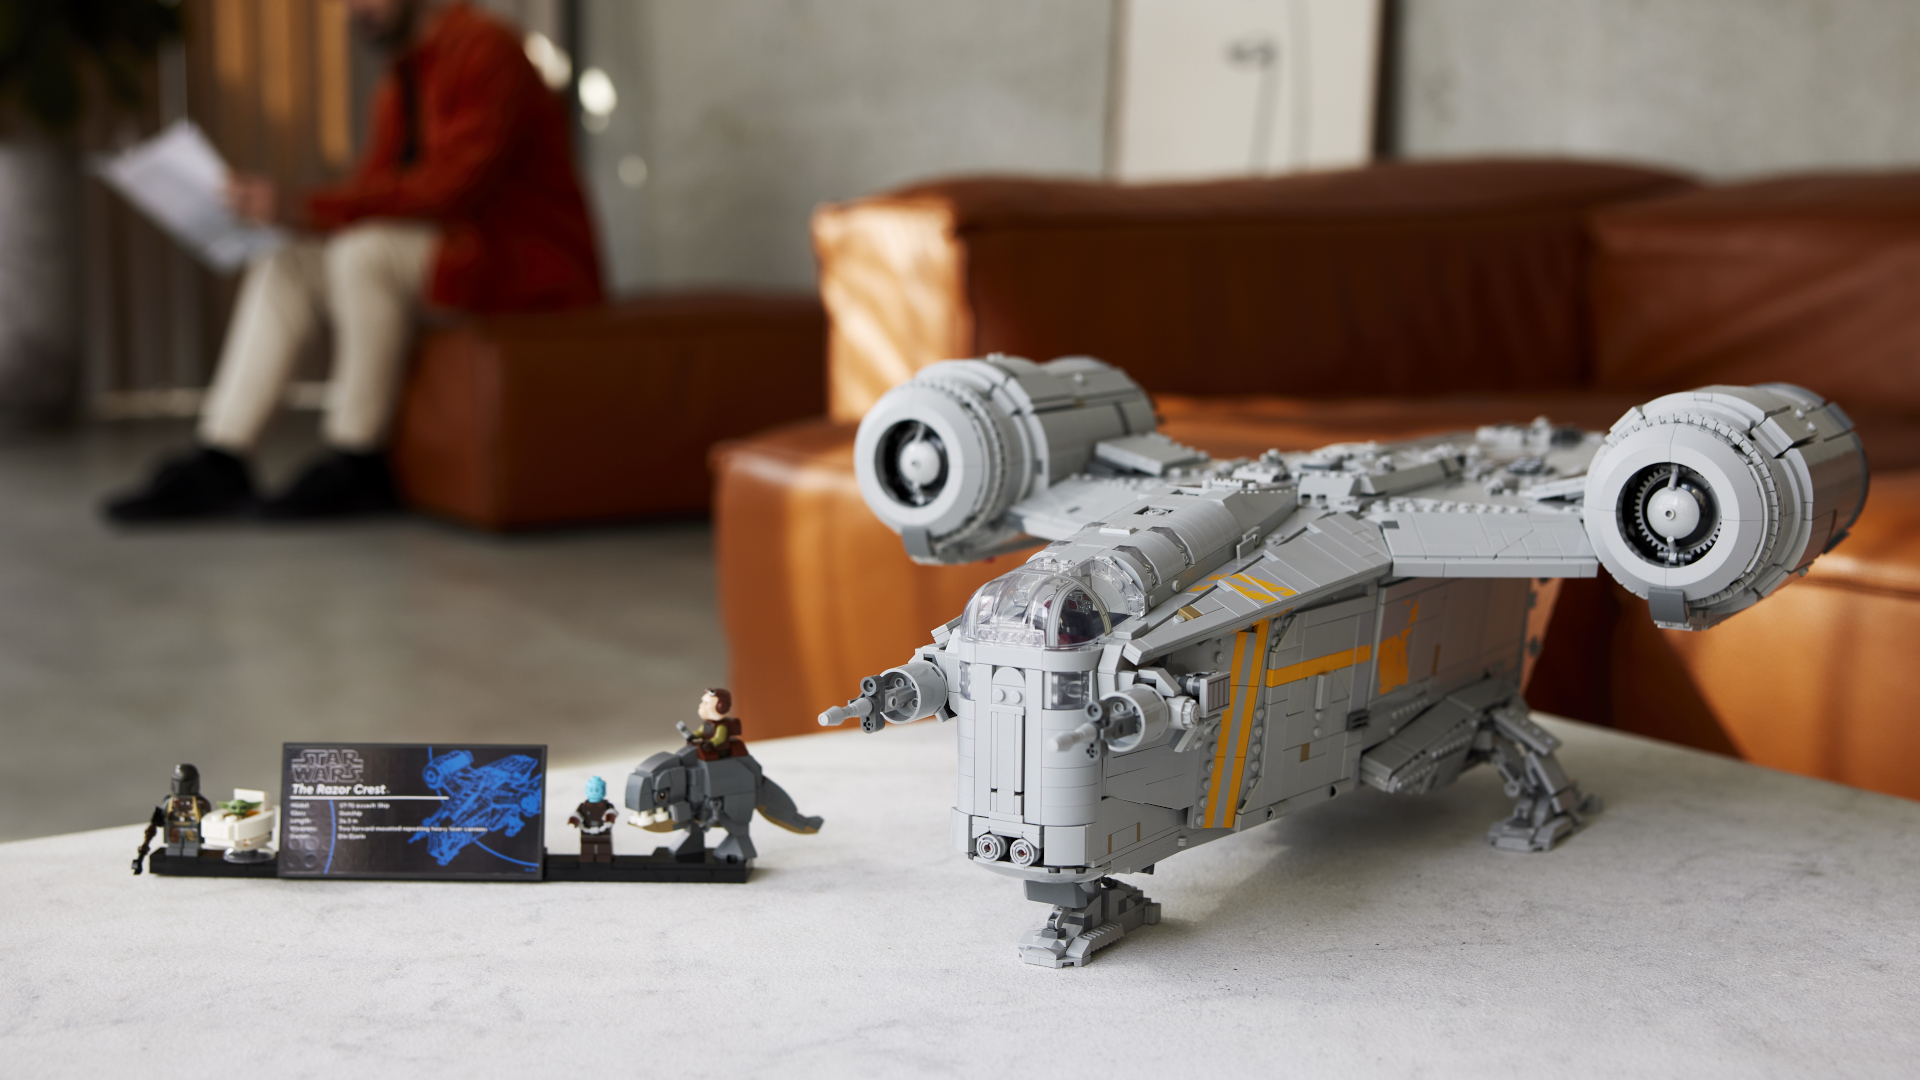 Early Star Wars Day Lego deal: $130 off UCS Razor Crest Space